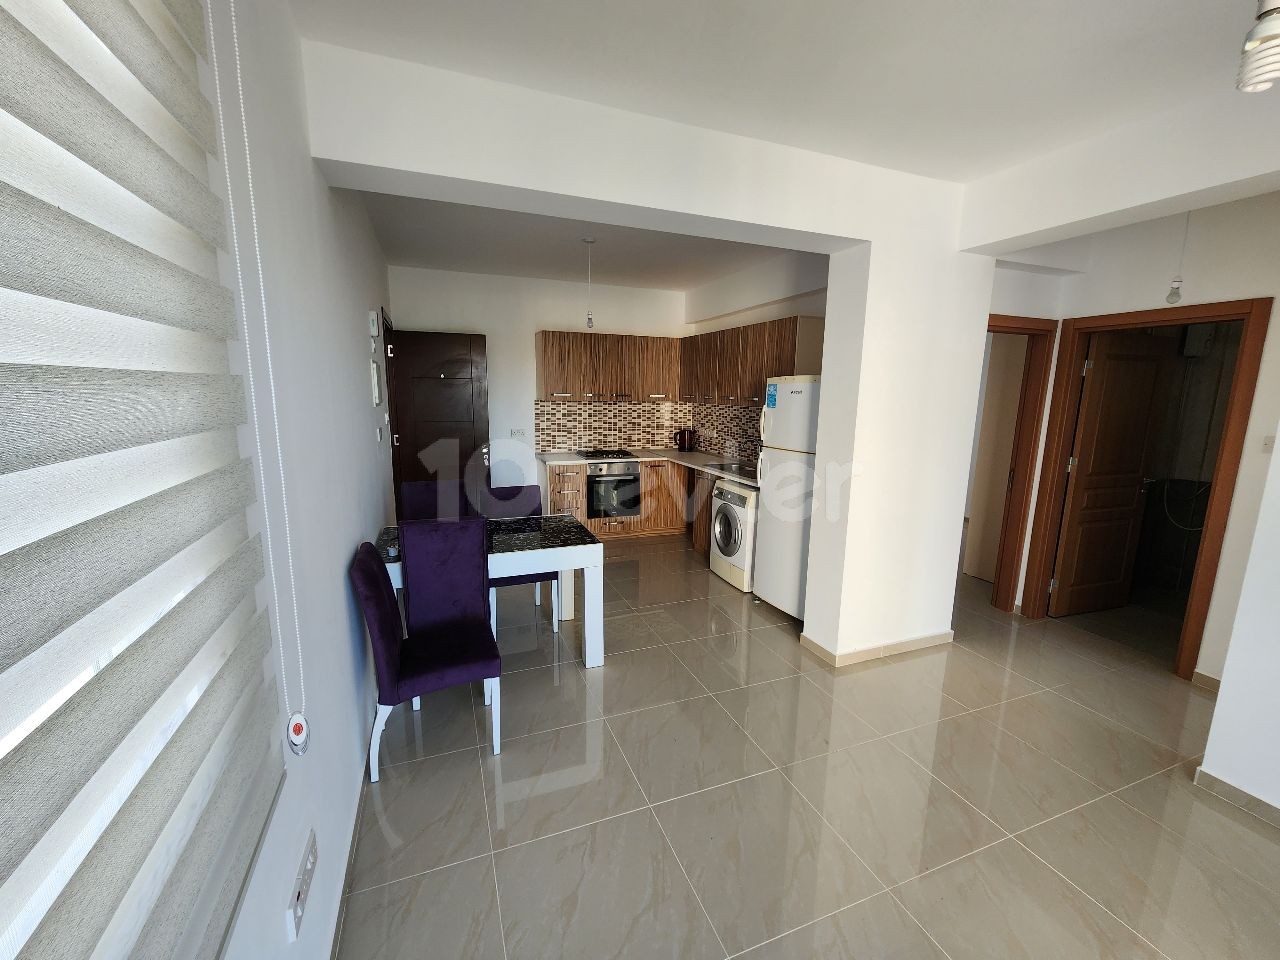 Opportunity for sale in Alsancak 2+1 apartment in a complex with pool